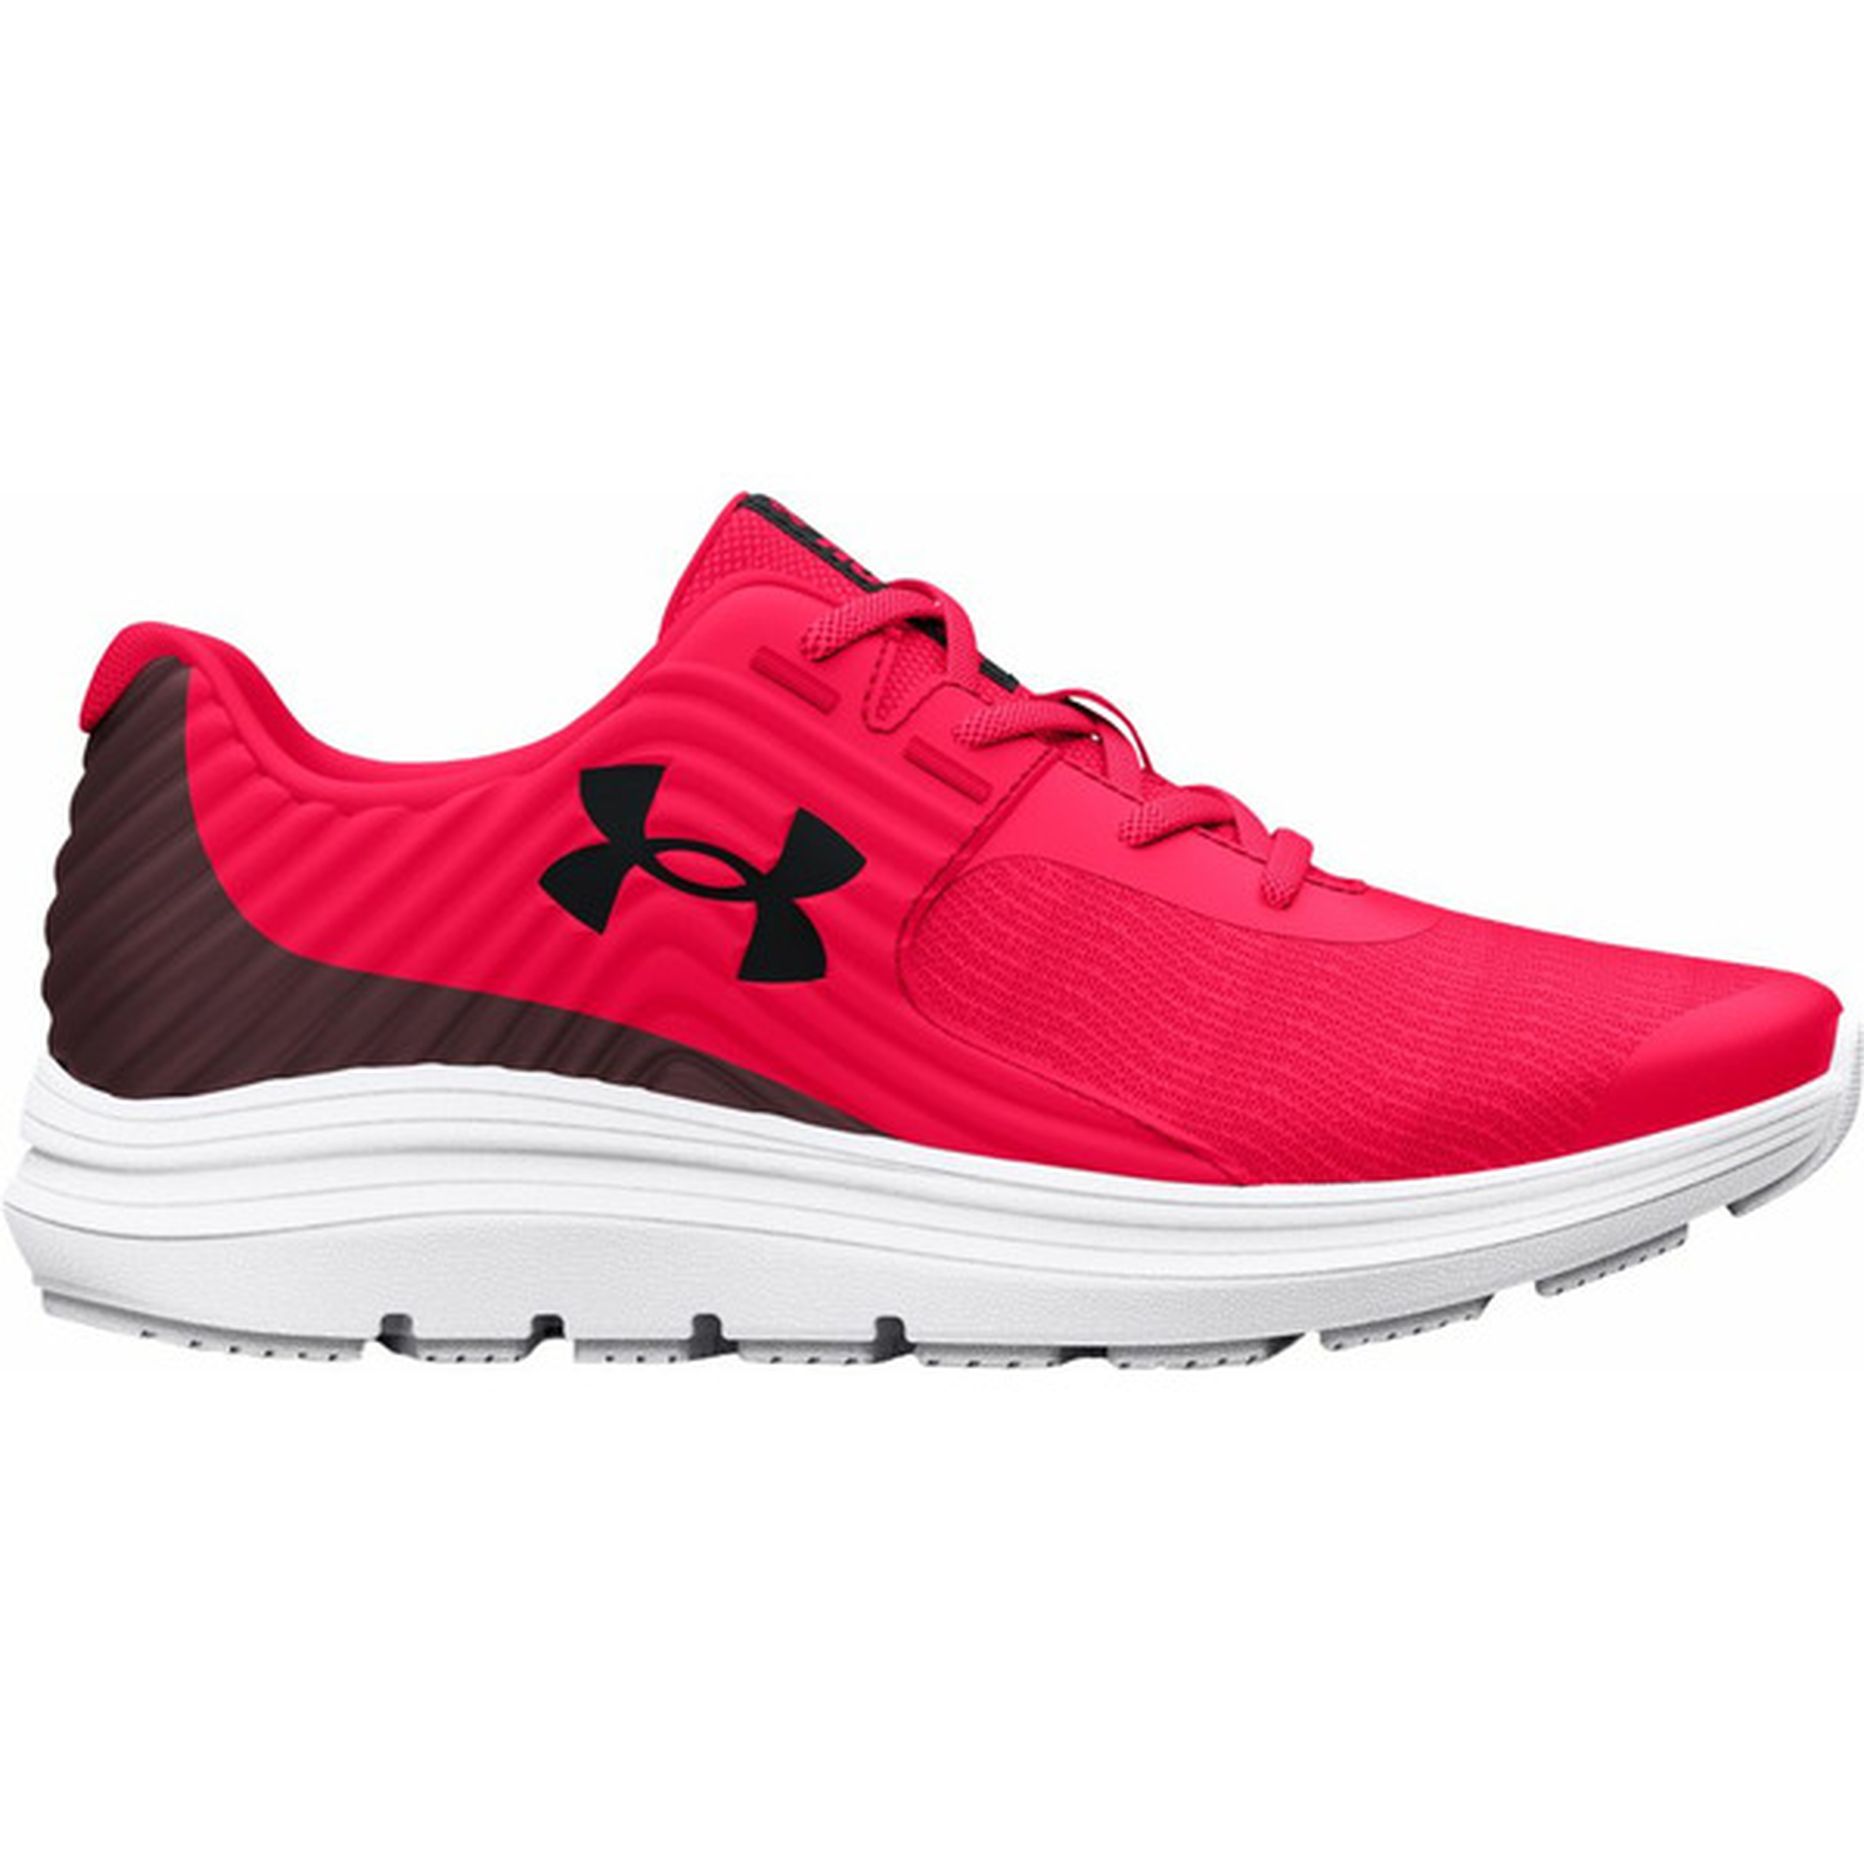 Under Armour Kids' Preschool Outhustle Shoes - Red & Black (1 each ...